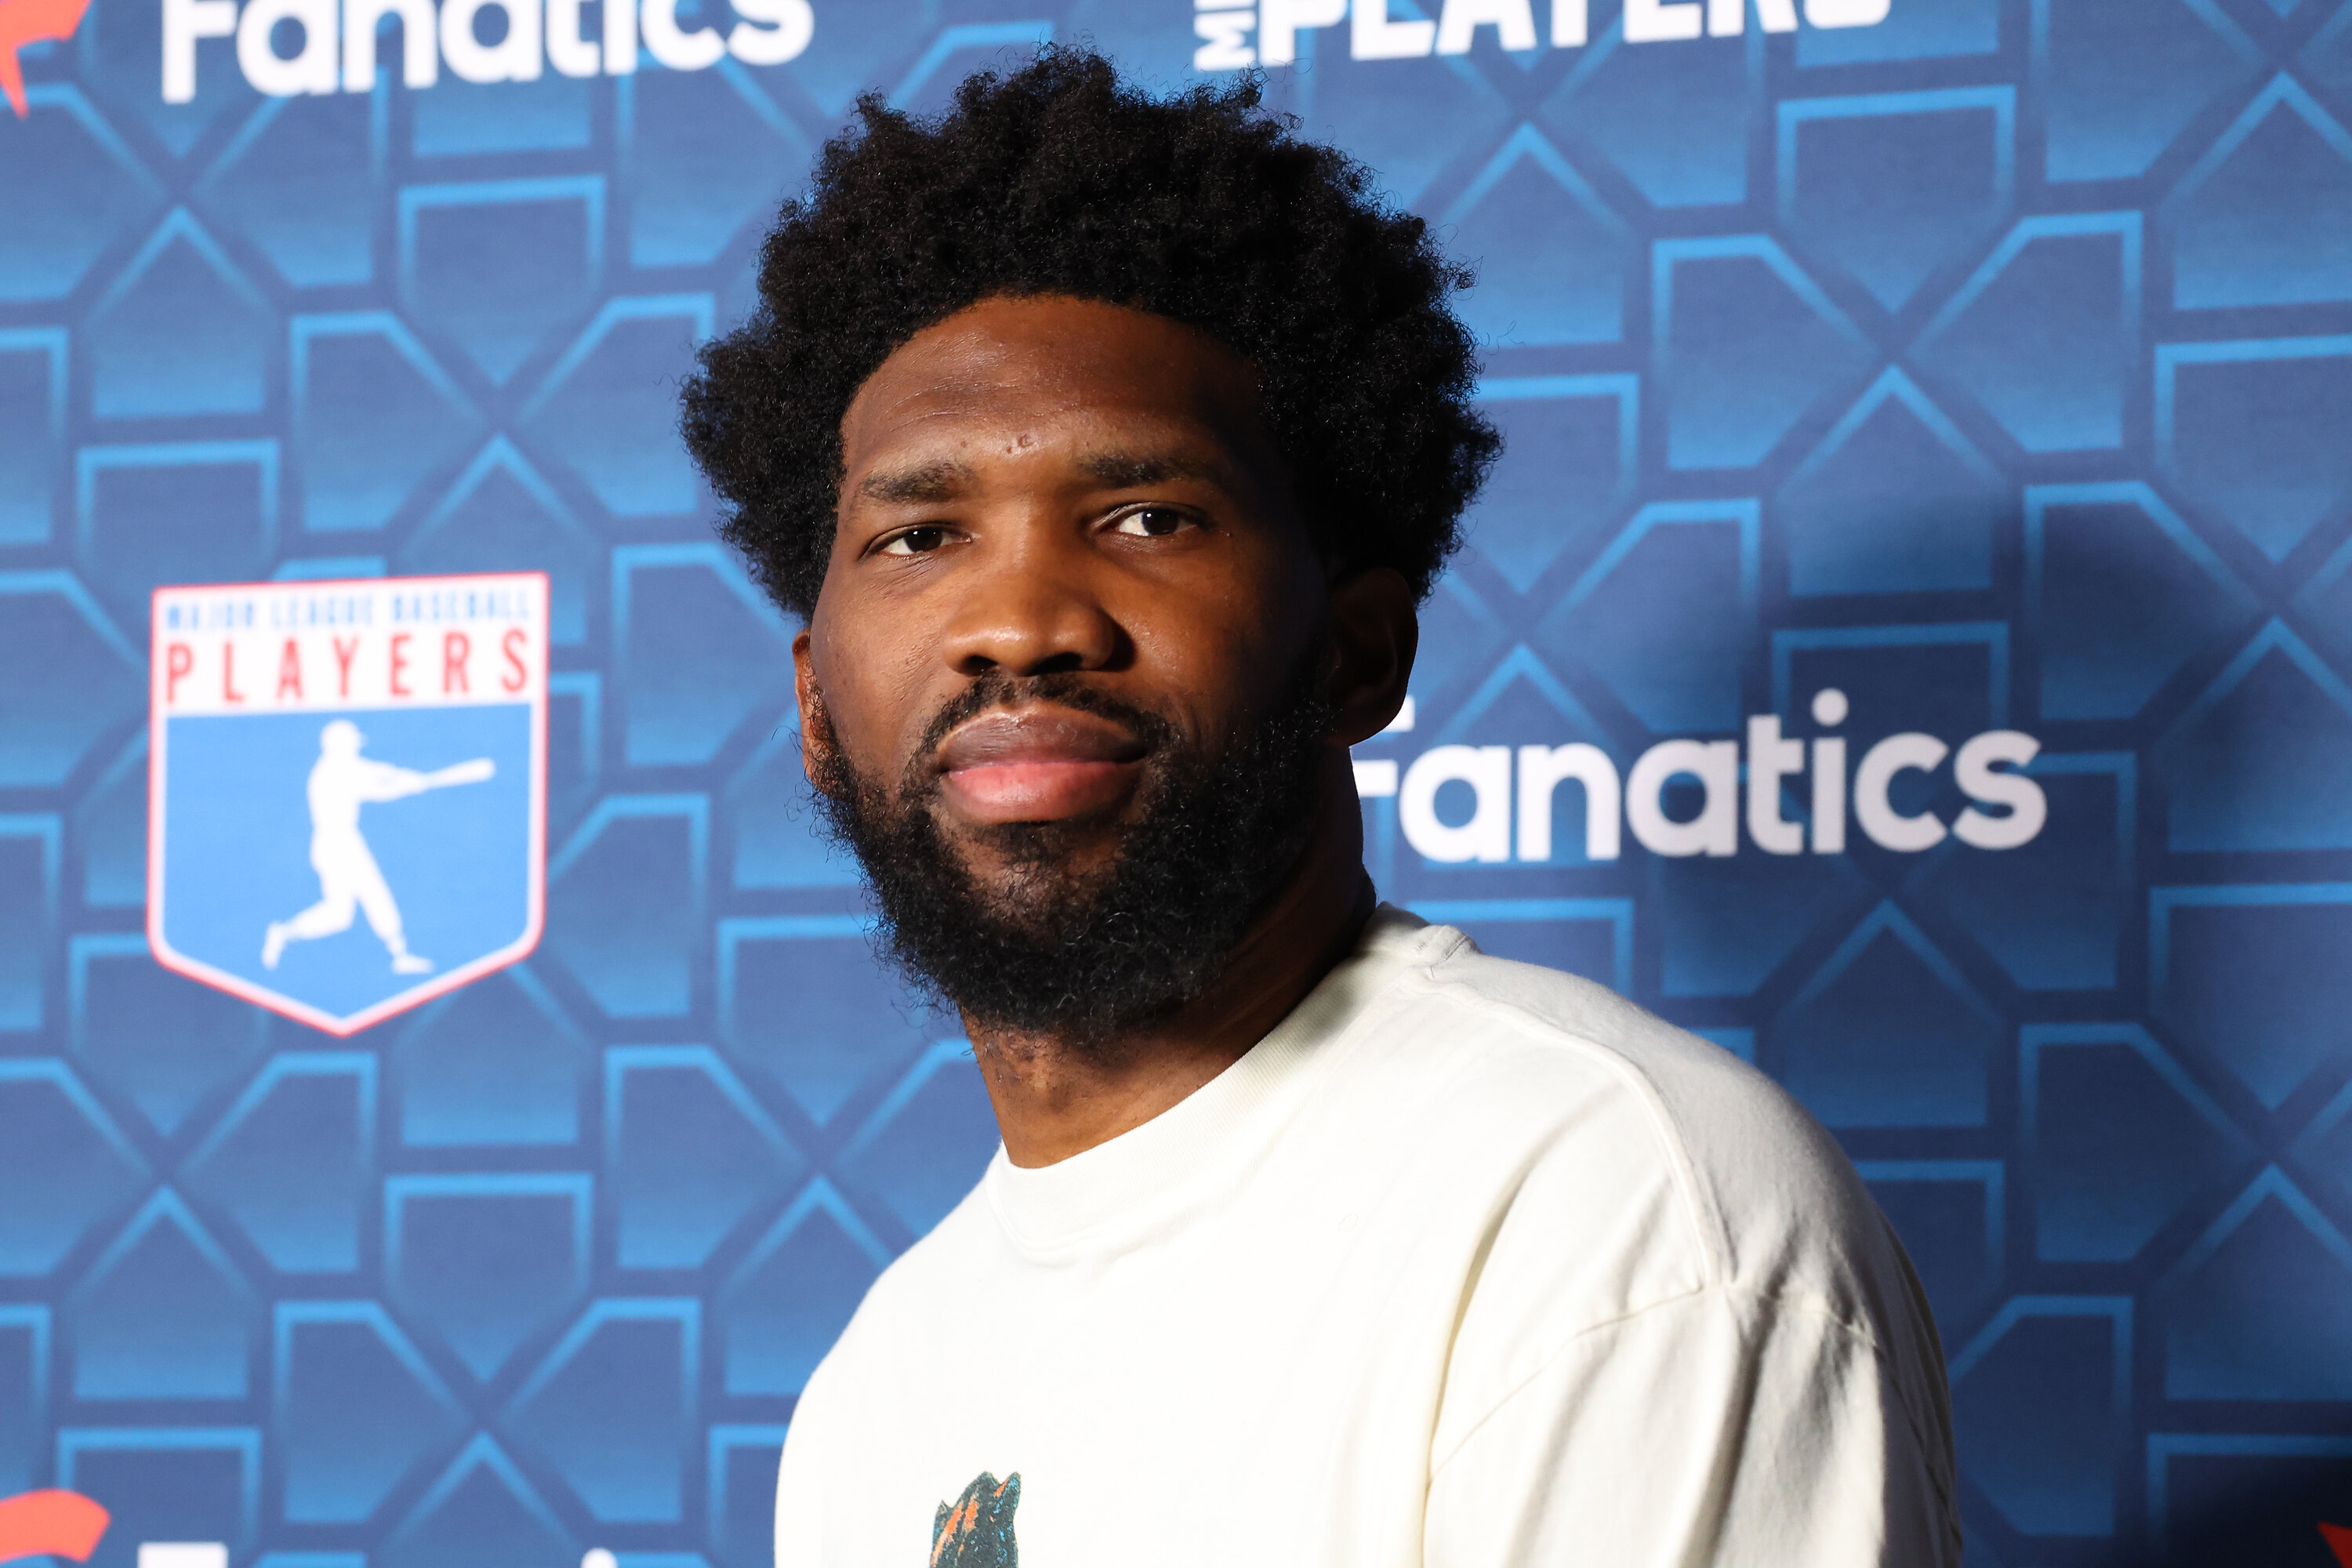 Joel Embiid is pledging $1 million to various Philly nonprofits. Photo: Leon Bennett/Getty Images.